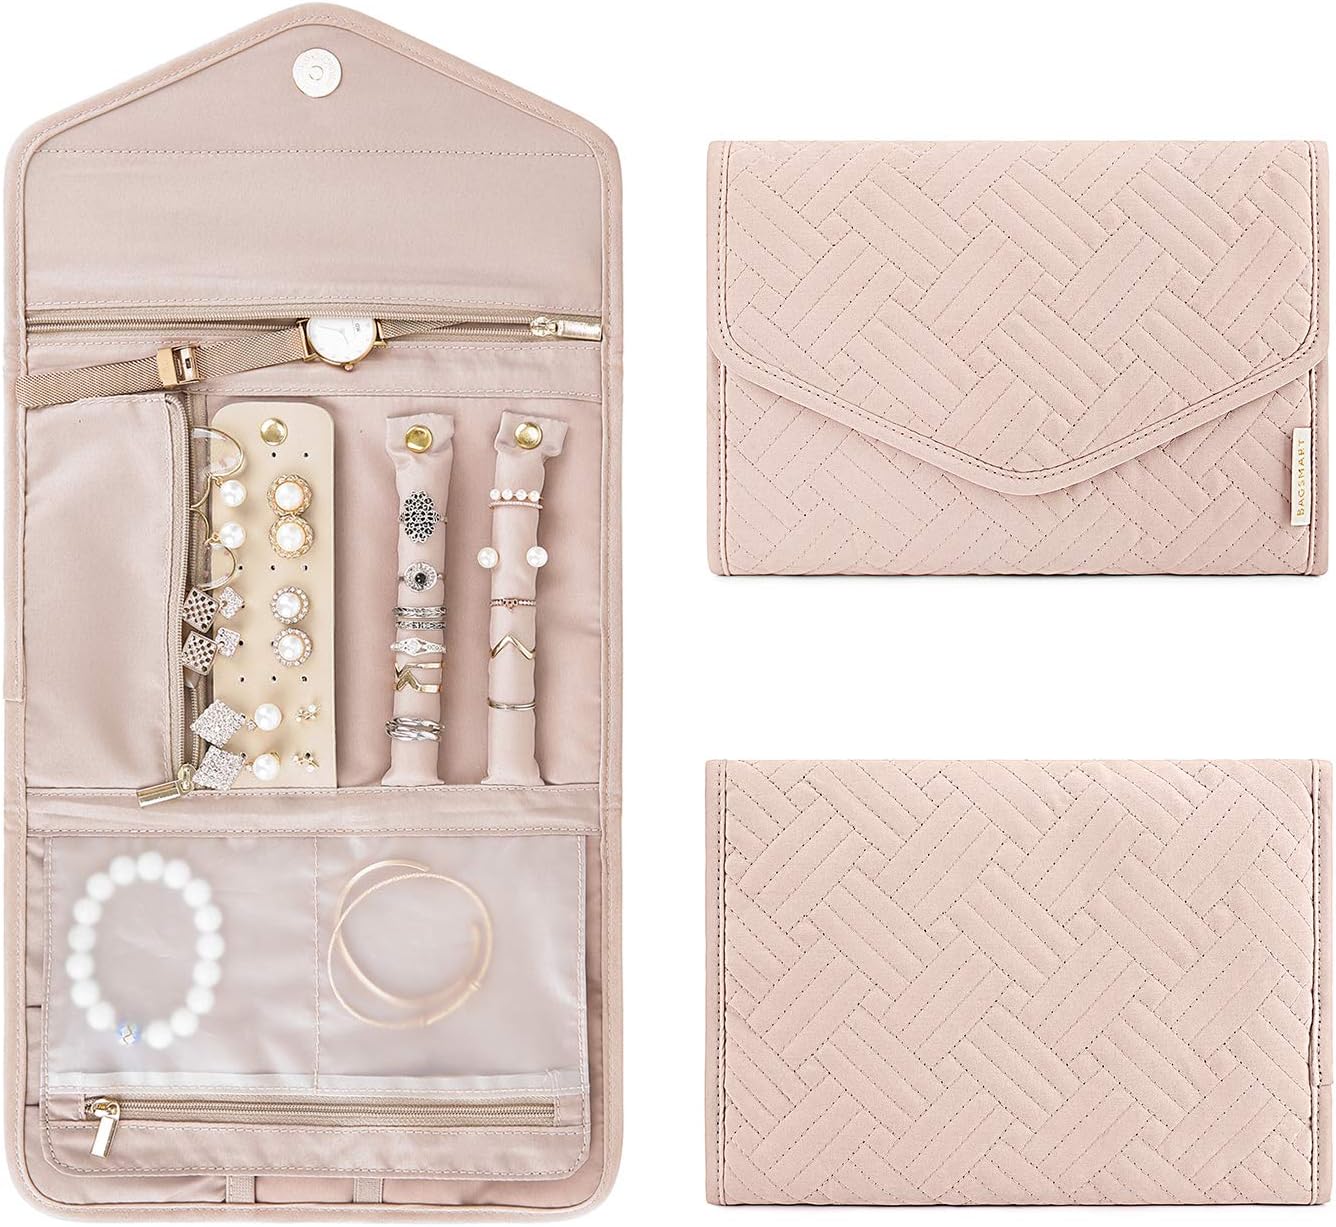 Travel Jewelry Organizer-The Best Gifts For Travelers